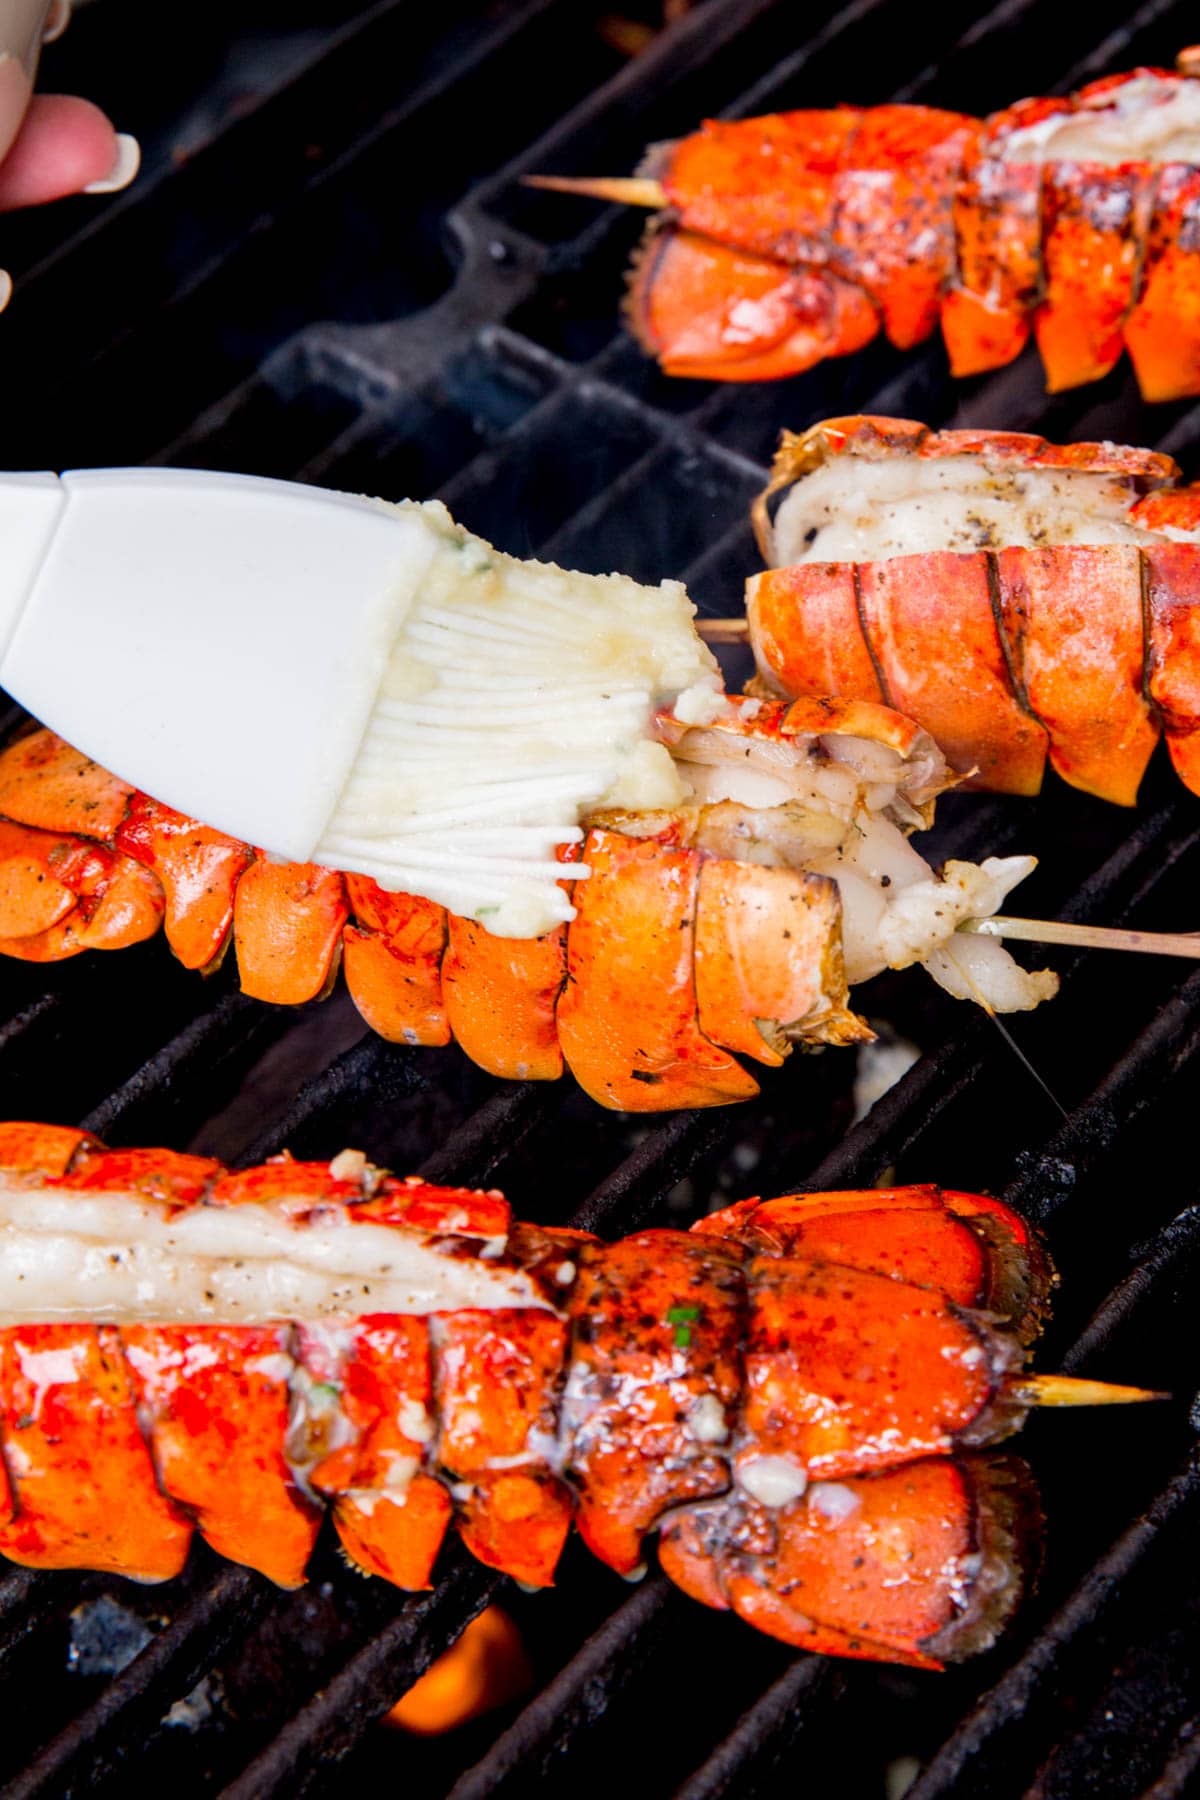 Spreading garlic butter sauce on lobster tails on the grill.